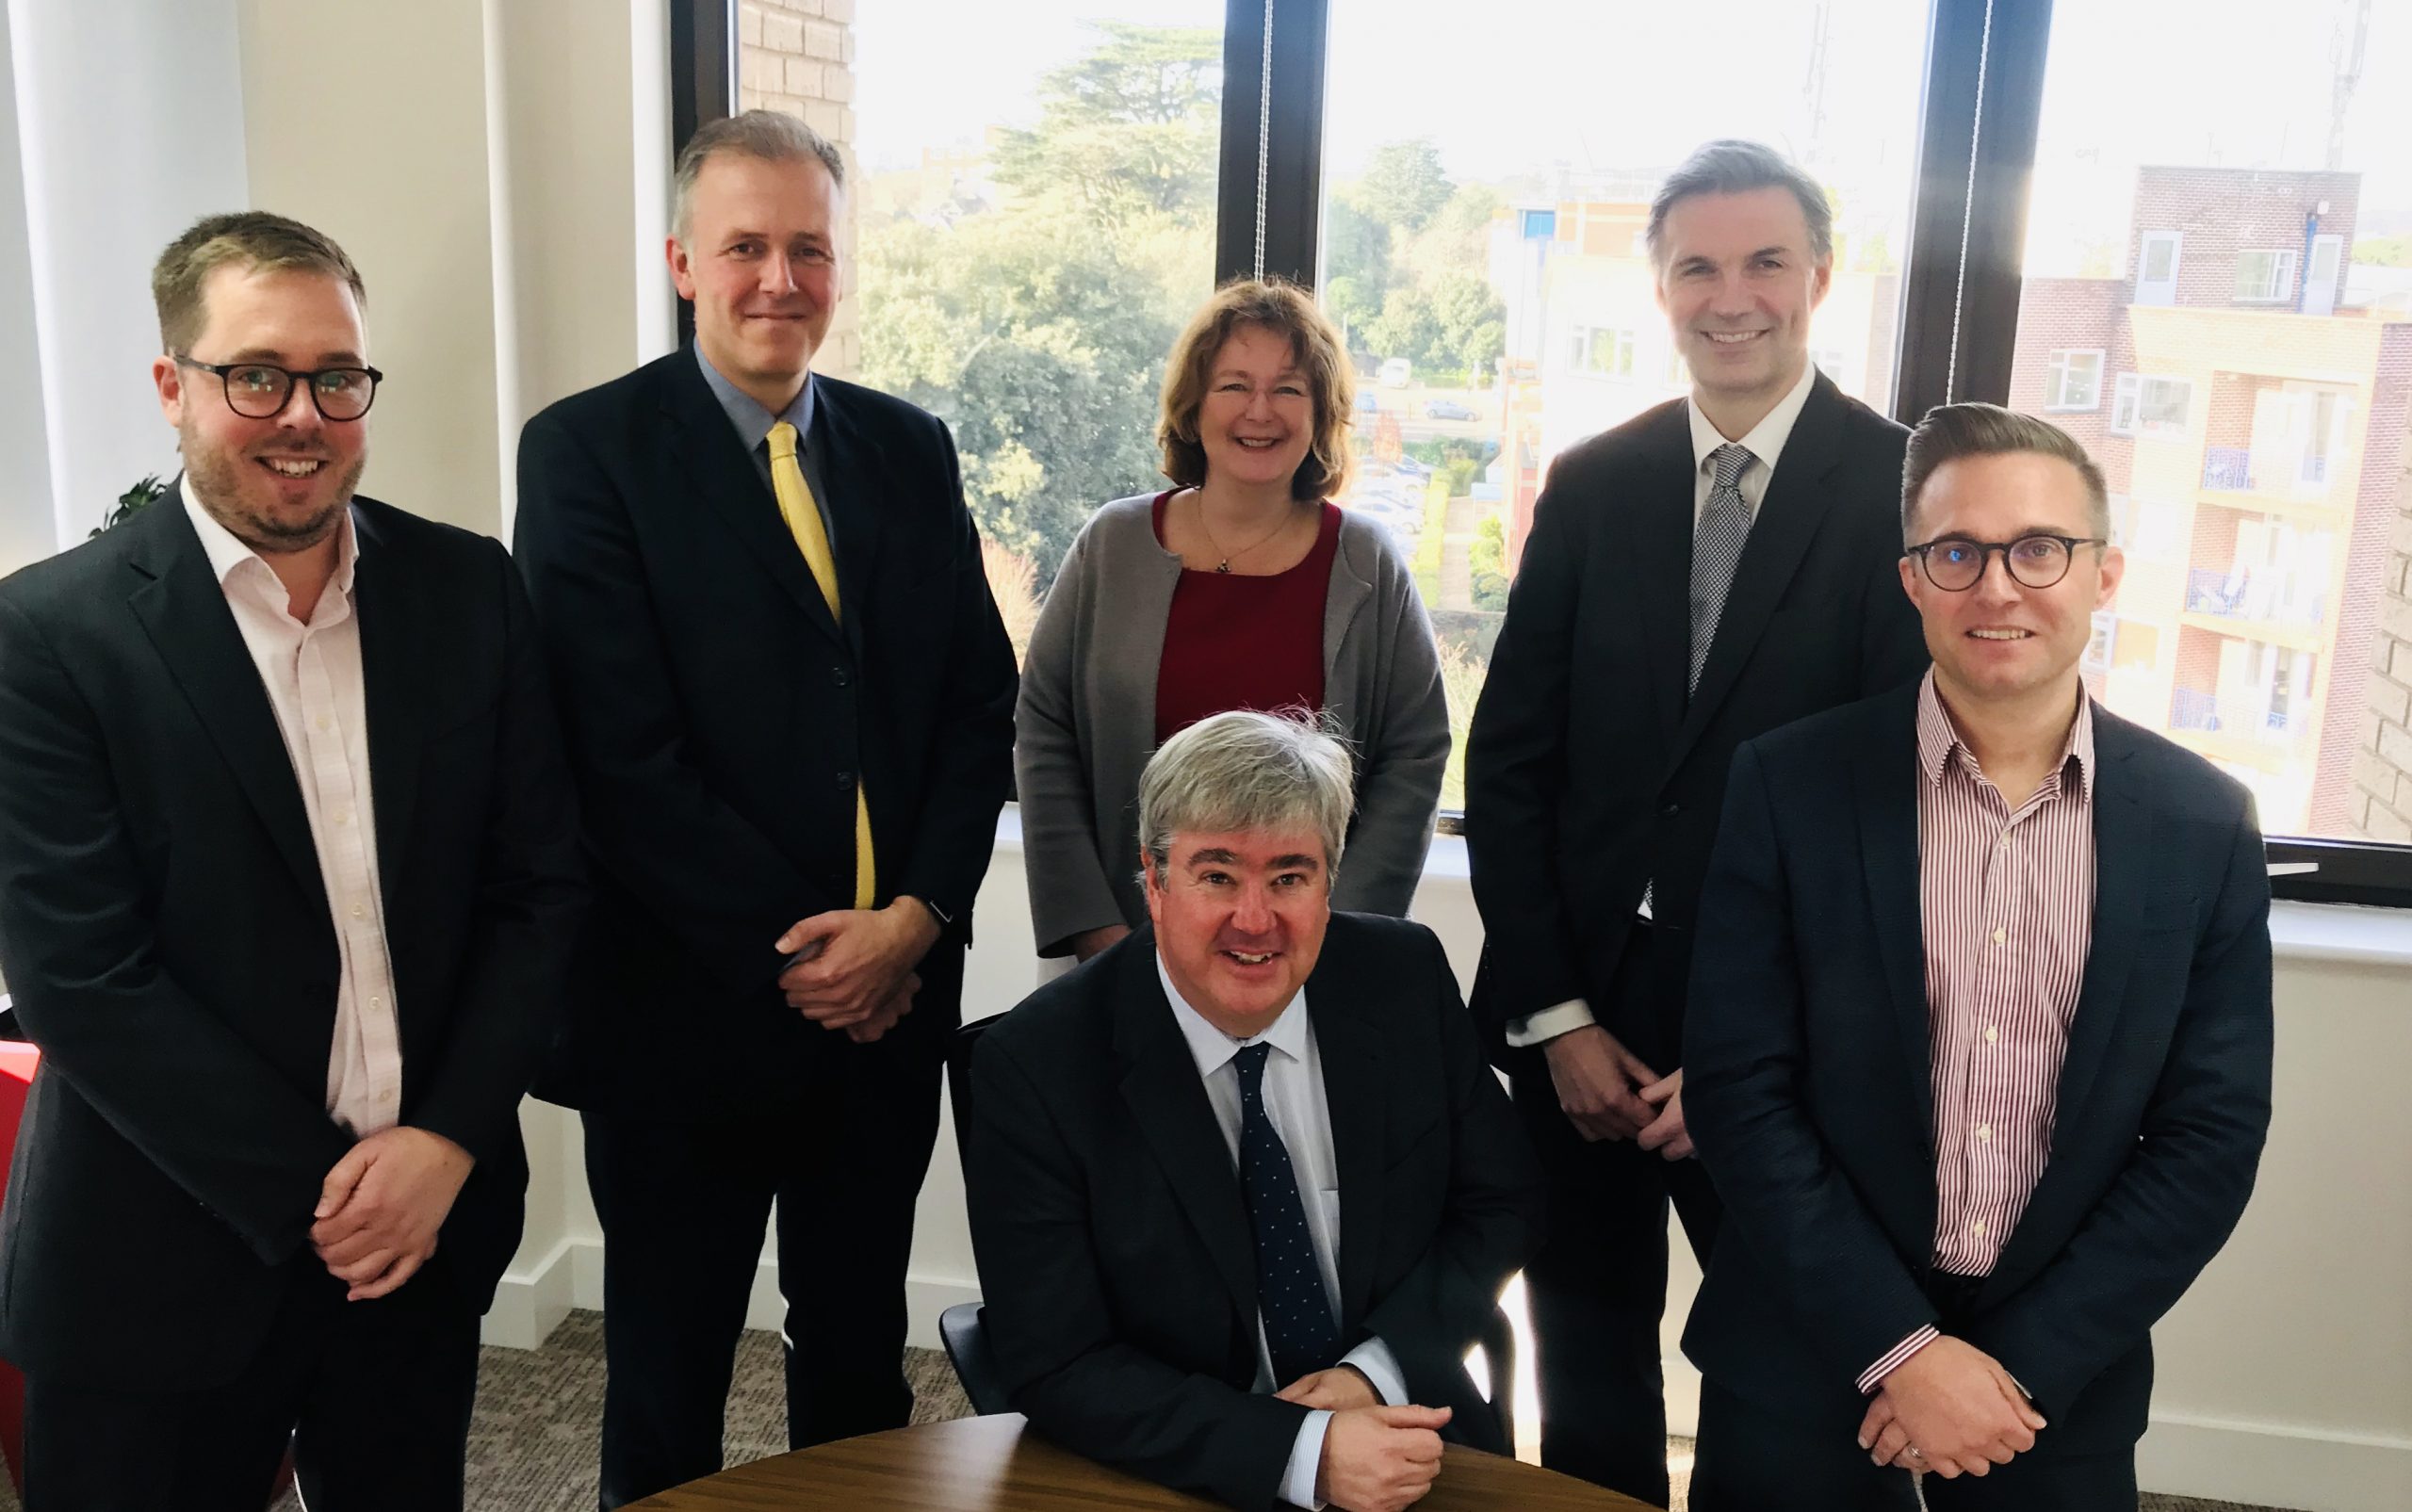 NICK FERNYHOUGH: One of Dorset’s best-known – and high profile – accountants is celebrating 35 years with Saffery Champness